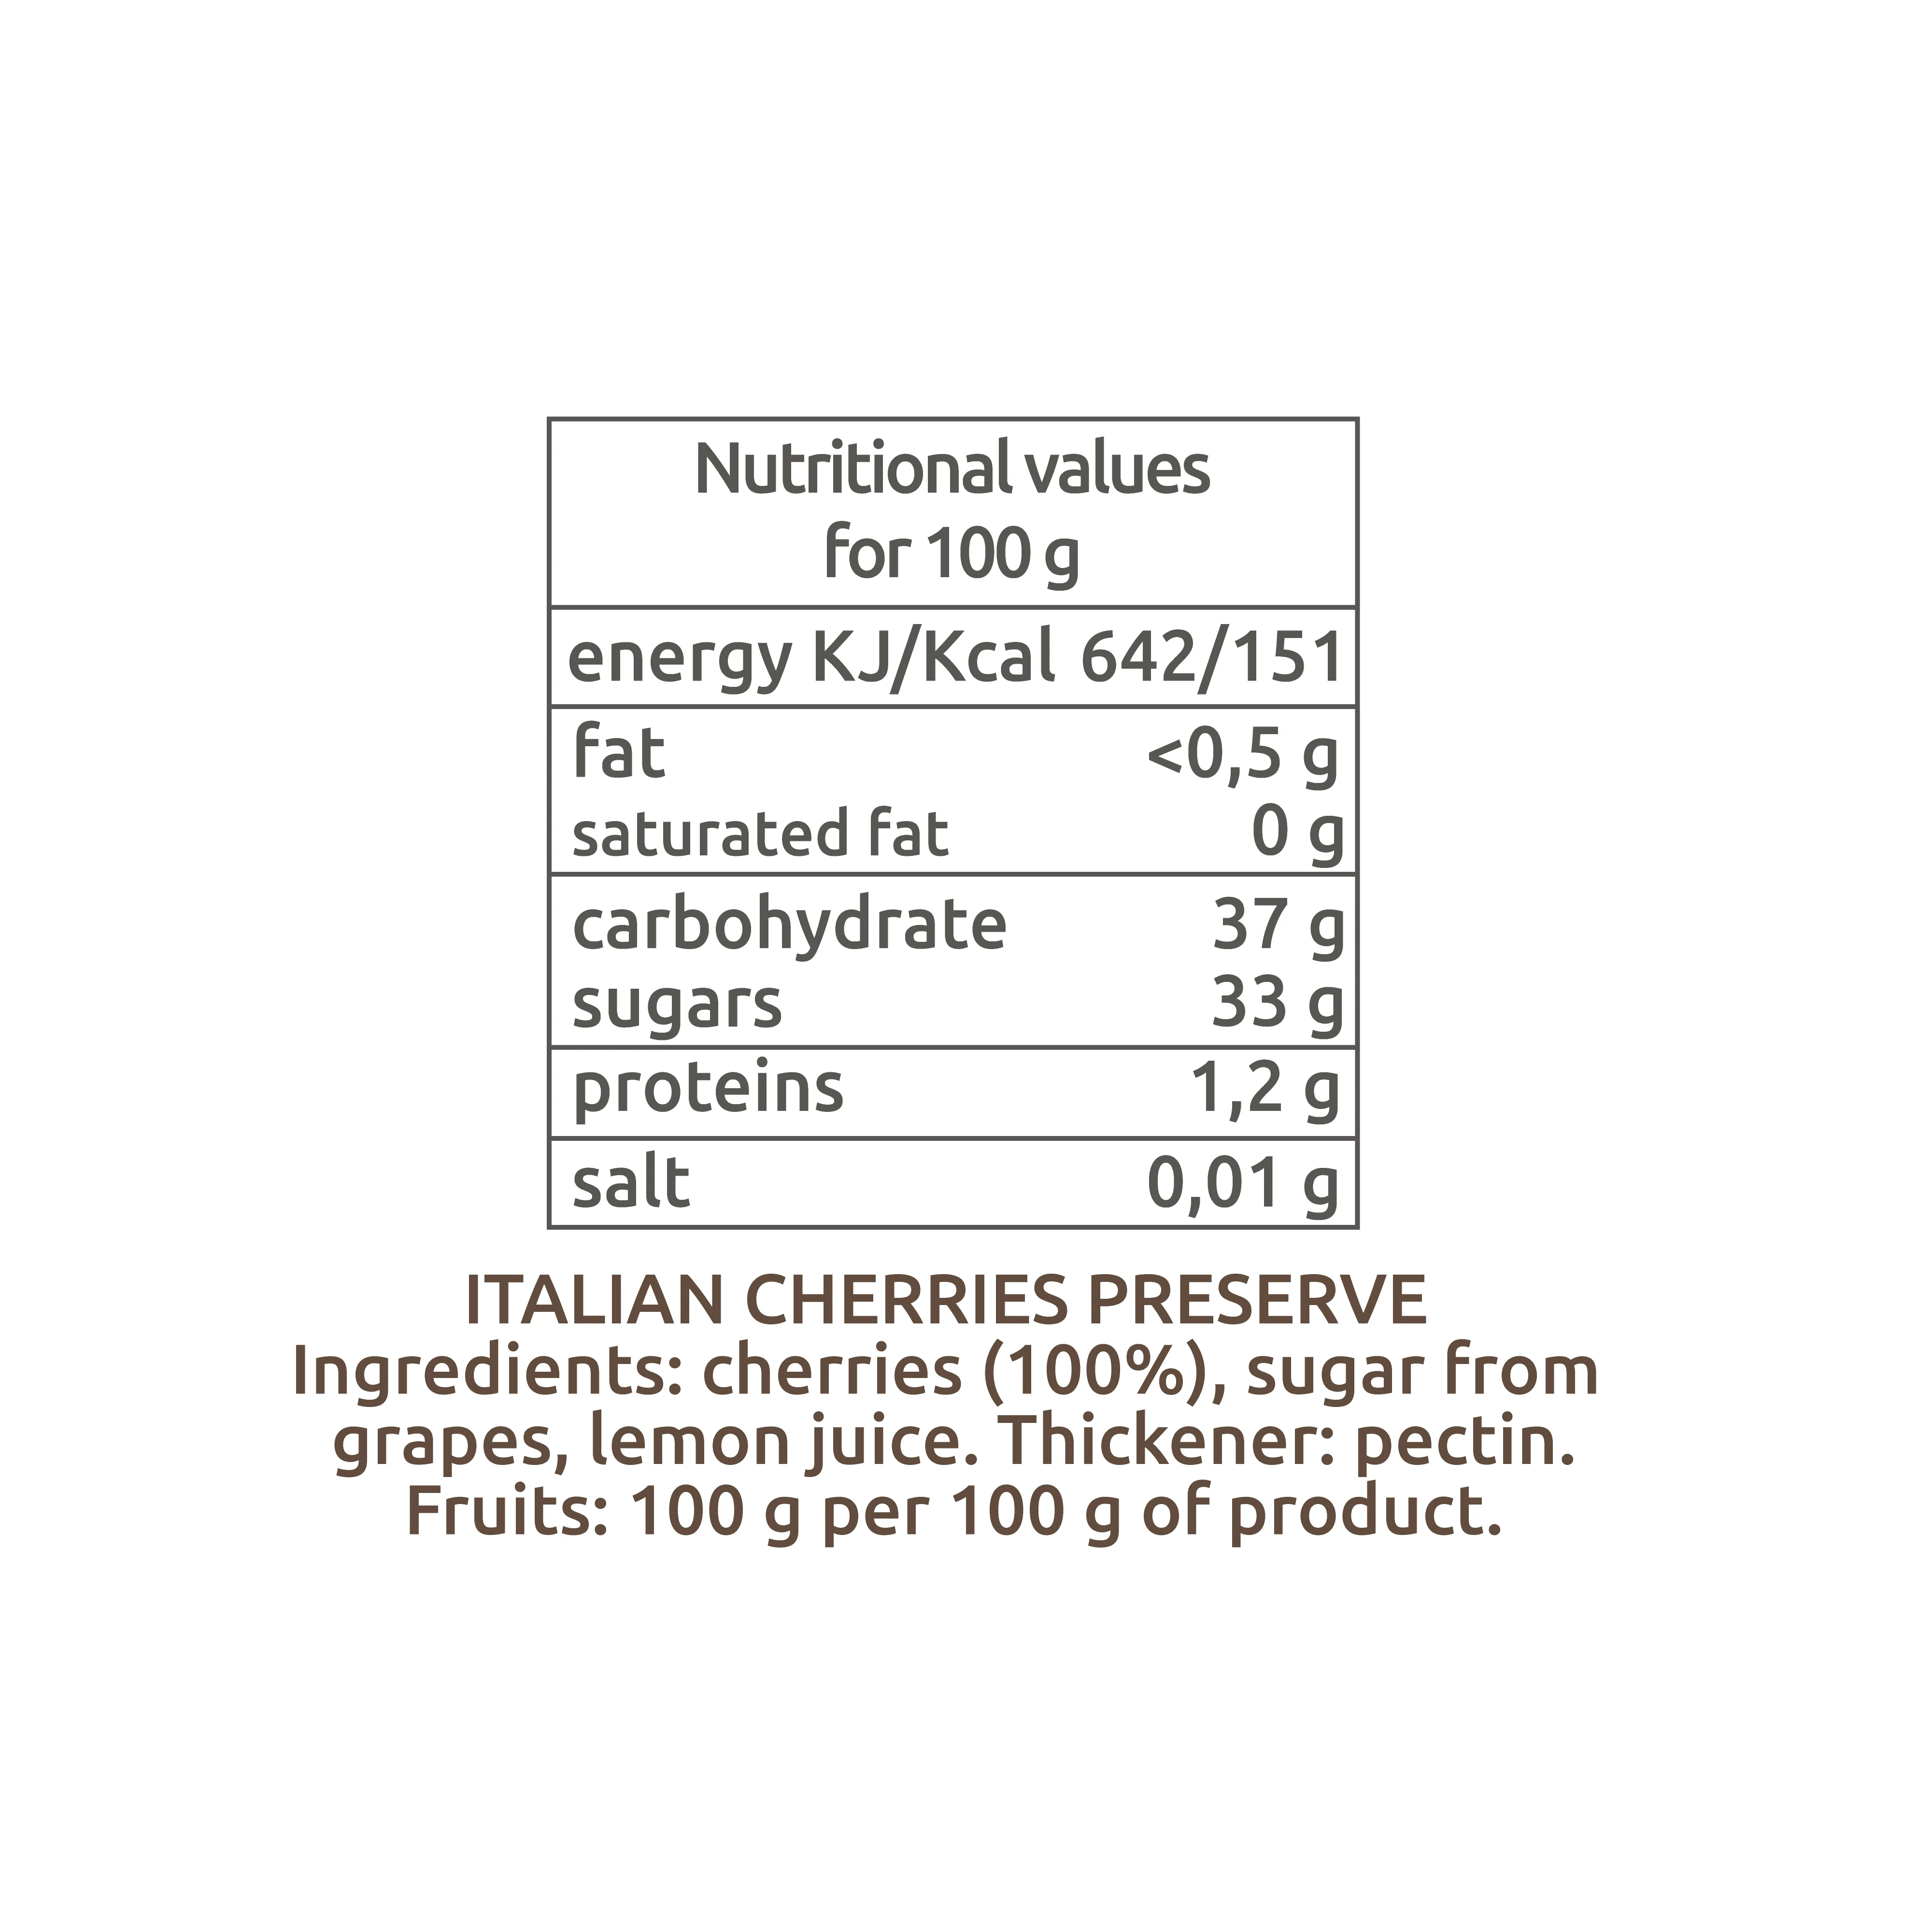 100% italian fruit ORTO D'AUTORE/ PRIVATE LABEL BLACK CHERRY  with only fruit sugar